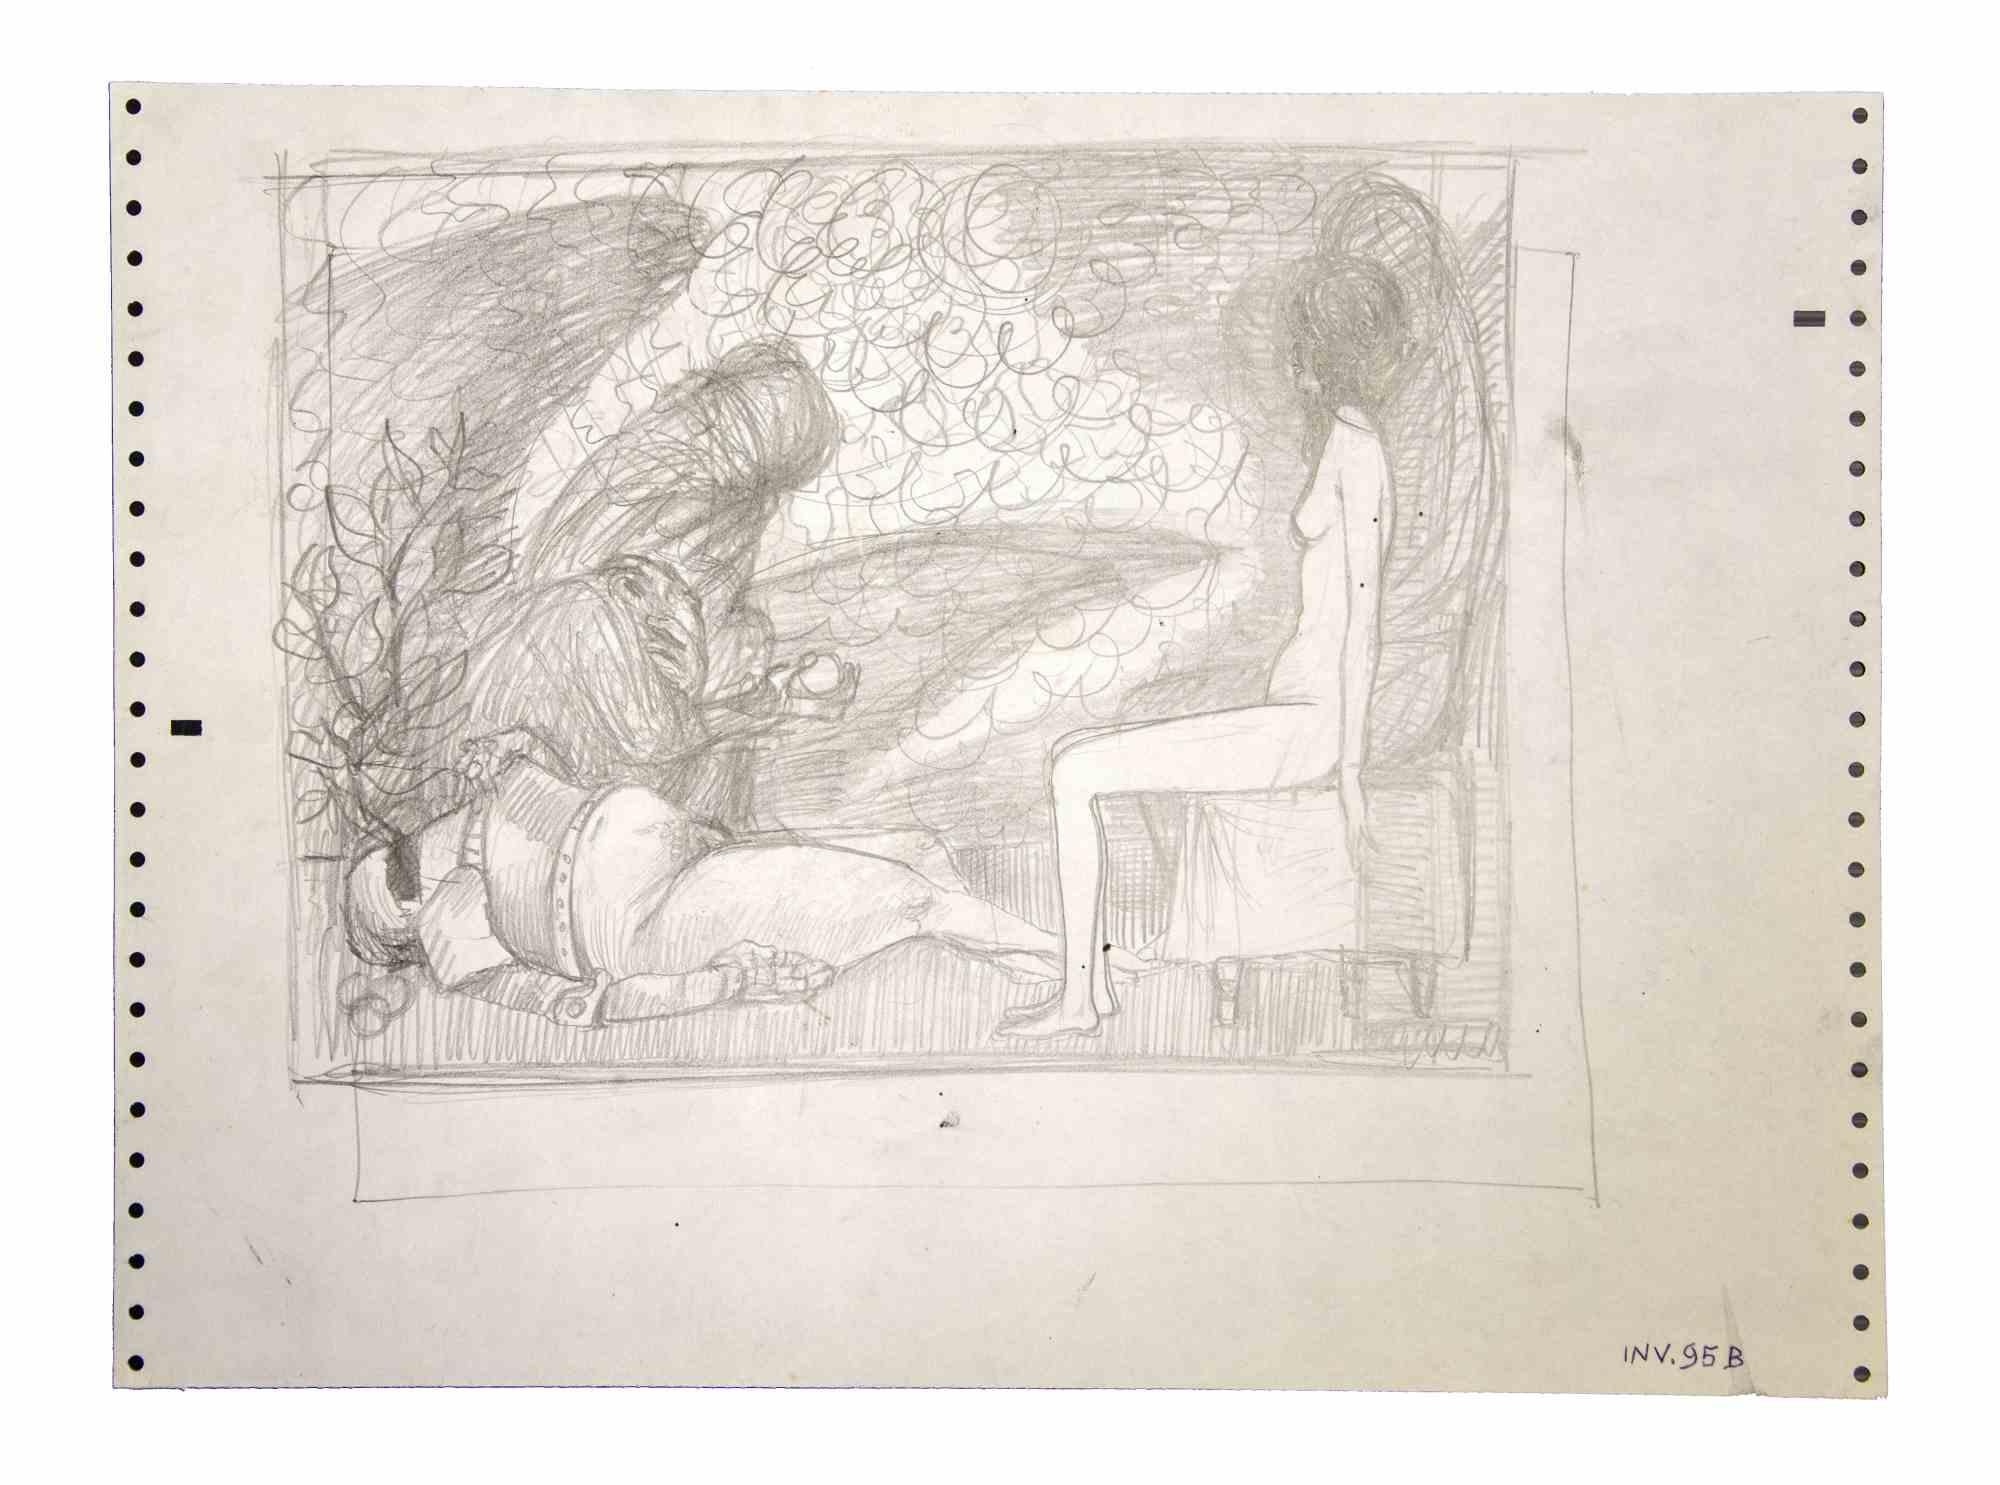 Sybil and Knight is an original contemporary artwork realized in the 1970s by the Italian Contemporary artist  Leo Guida  (1992 - 2017).

Original drawings in pencil on paper.

Good conditions but aged.

The artwork is depicted through strong